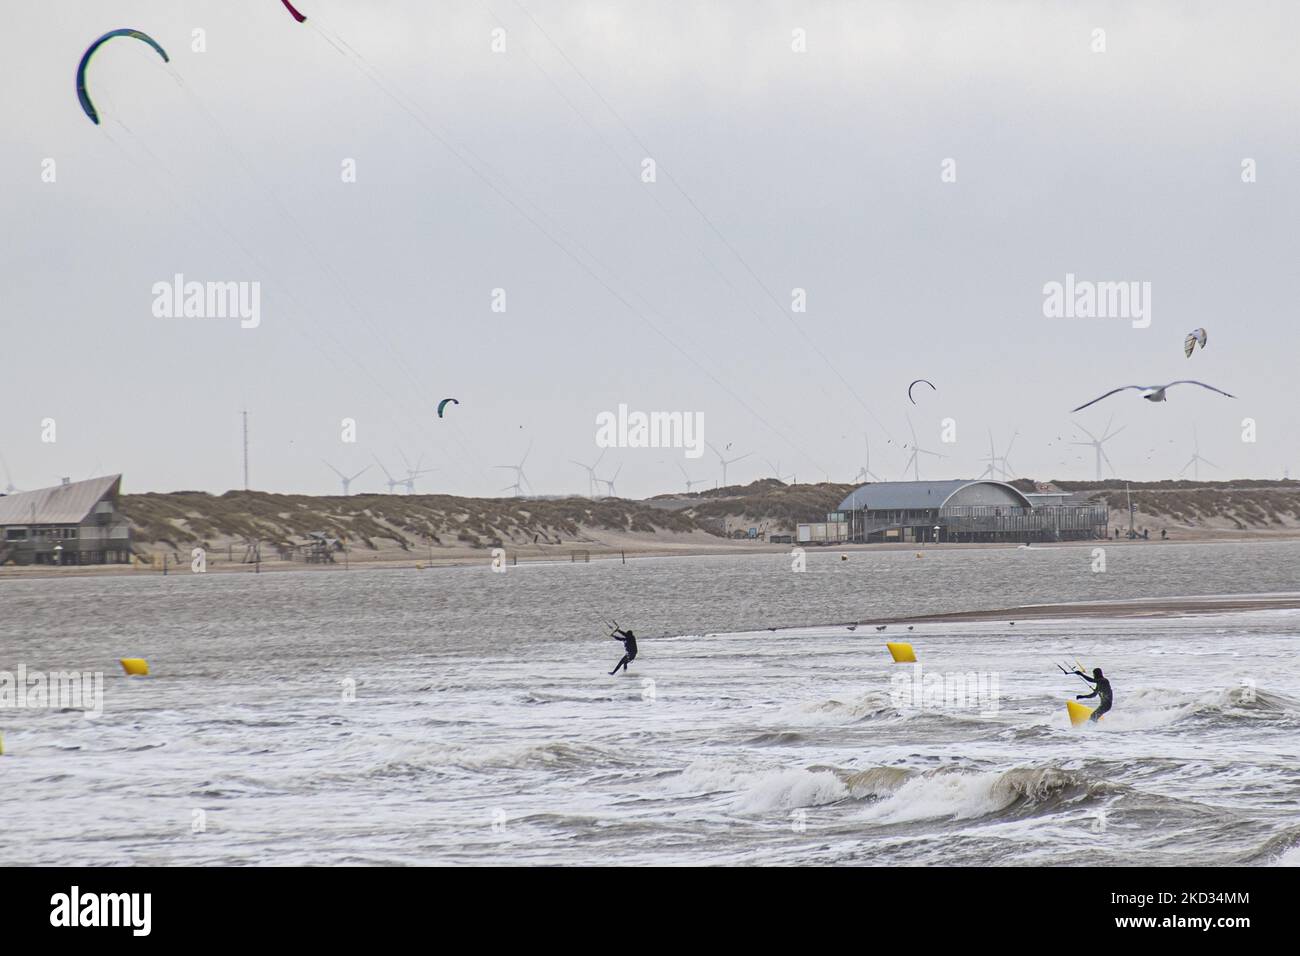 People do kitesurf over the waves and other watersports as storm Eunice hits with strong winds the Dutch shore. Storm Eunice hit the Netherlands after storm Dudley with wind gust speed exceeding 120km/h, resulting in damages in buildings, cars and killing people from trees falling. The government issued a red warning and 112 alarm emergency notifications on the phones before the storm hit.The Brouwersdam is a six kilometer long dam that connects the provinces of South Holland and Zeeland. It is part of the Delta Works and was opened to the public in 1971. Brouwersdam, Ouddorp, The Netherlands  Stock Photo